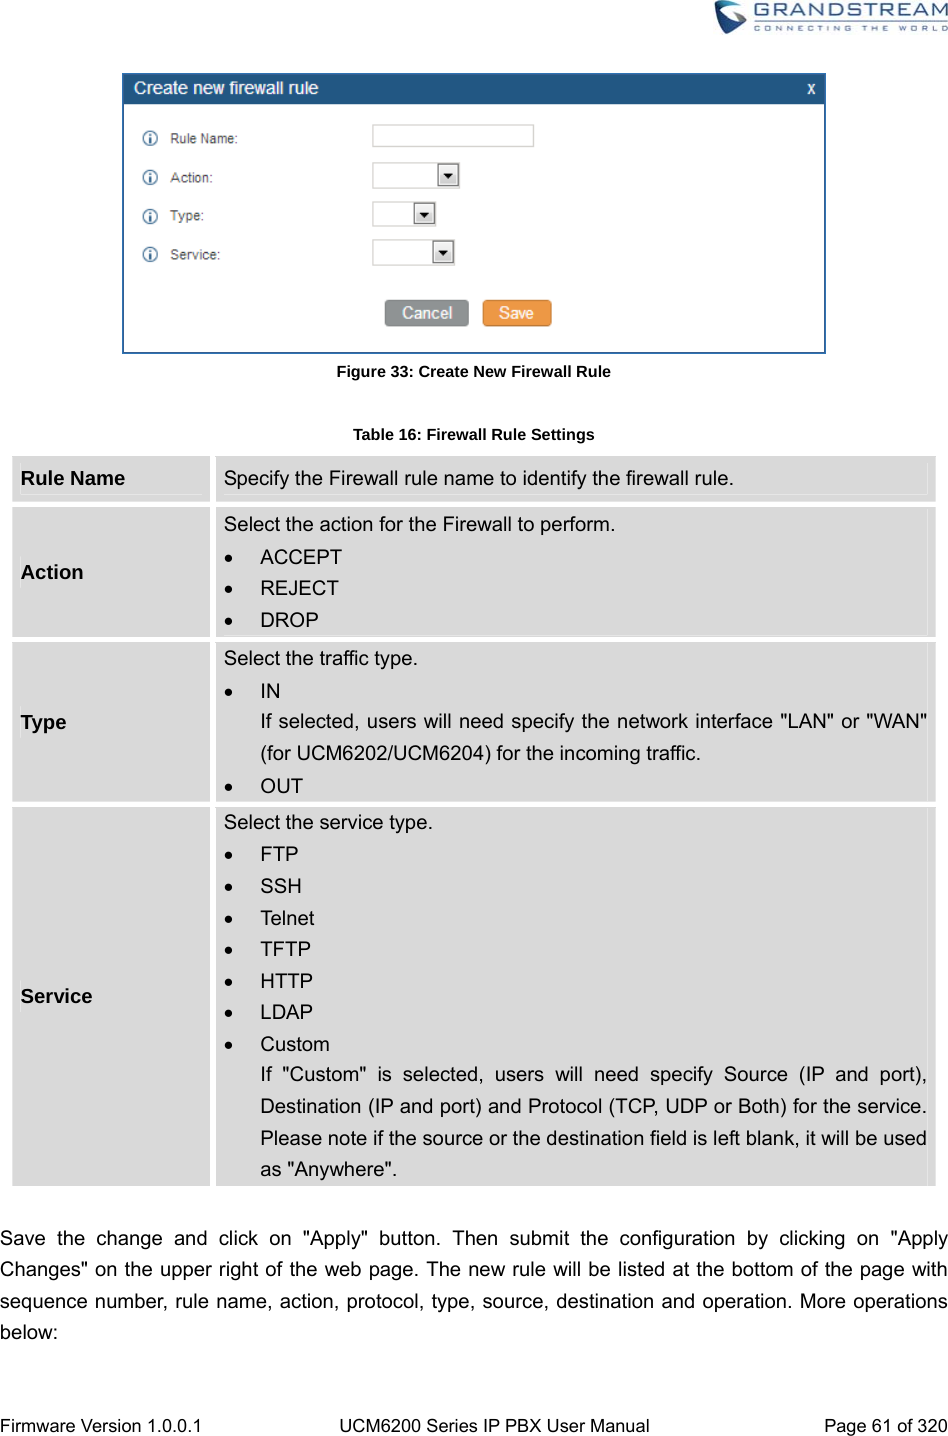  Firmware Version 1.0.0.1  UCM6200 Series IP PBX User Manual  Page 61 of 320  Figure 33: Create New Firewall Rule  Table 16: Firewall Rule Settings Rule Name  Specify the Firewall rule name to identify the firewall rule. Action Select the action for the Firewall to perform.  ACCEPT  REJECT  DROP Type Select the traffic type.  IN If selected, users will need specify the network interface &quot;LAN&quot; or &quot;WAN&quot; (for UCM6202/UCM6204) for the incoming traffic.  OUT Service Select the service type.  FTP  SSH  Telnet  TFTP  HTTP  LDAP  Custom If &quot;Custom&quot; is selected, users will need specify Source (IP and port), Destination (IP and port) and Protocol (TCP, UDP or Both) for the service. Please note if the source or the destination field is left blank, it will be used as &quot;Anywhere&quot;.  Save the change and click on &quot;Apply&quot; button. Then submit the configuration by clicking on &quot;Apply Changes&quot; on the upper right of the web page. The new rule will be listed at the bottom of the page with sequence number, rule name, action, protocol, type, source, destination and operation. More operations below: 